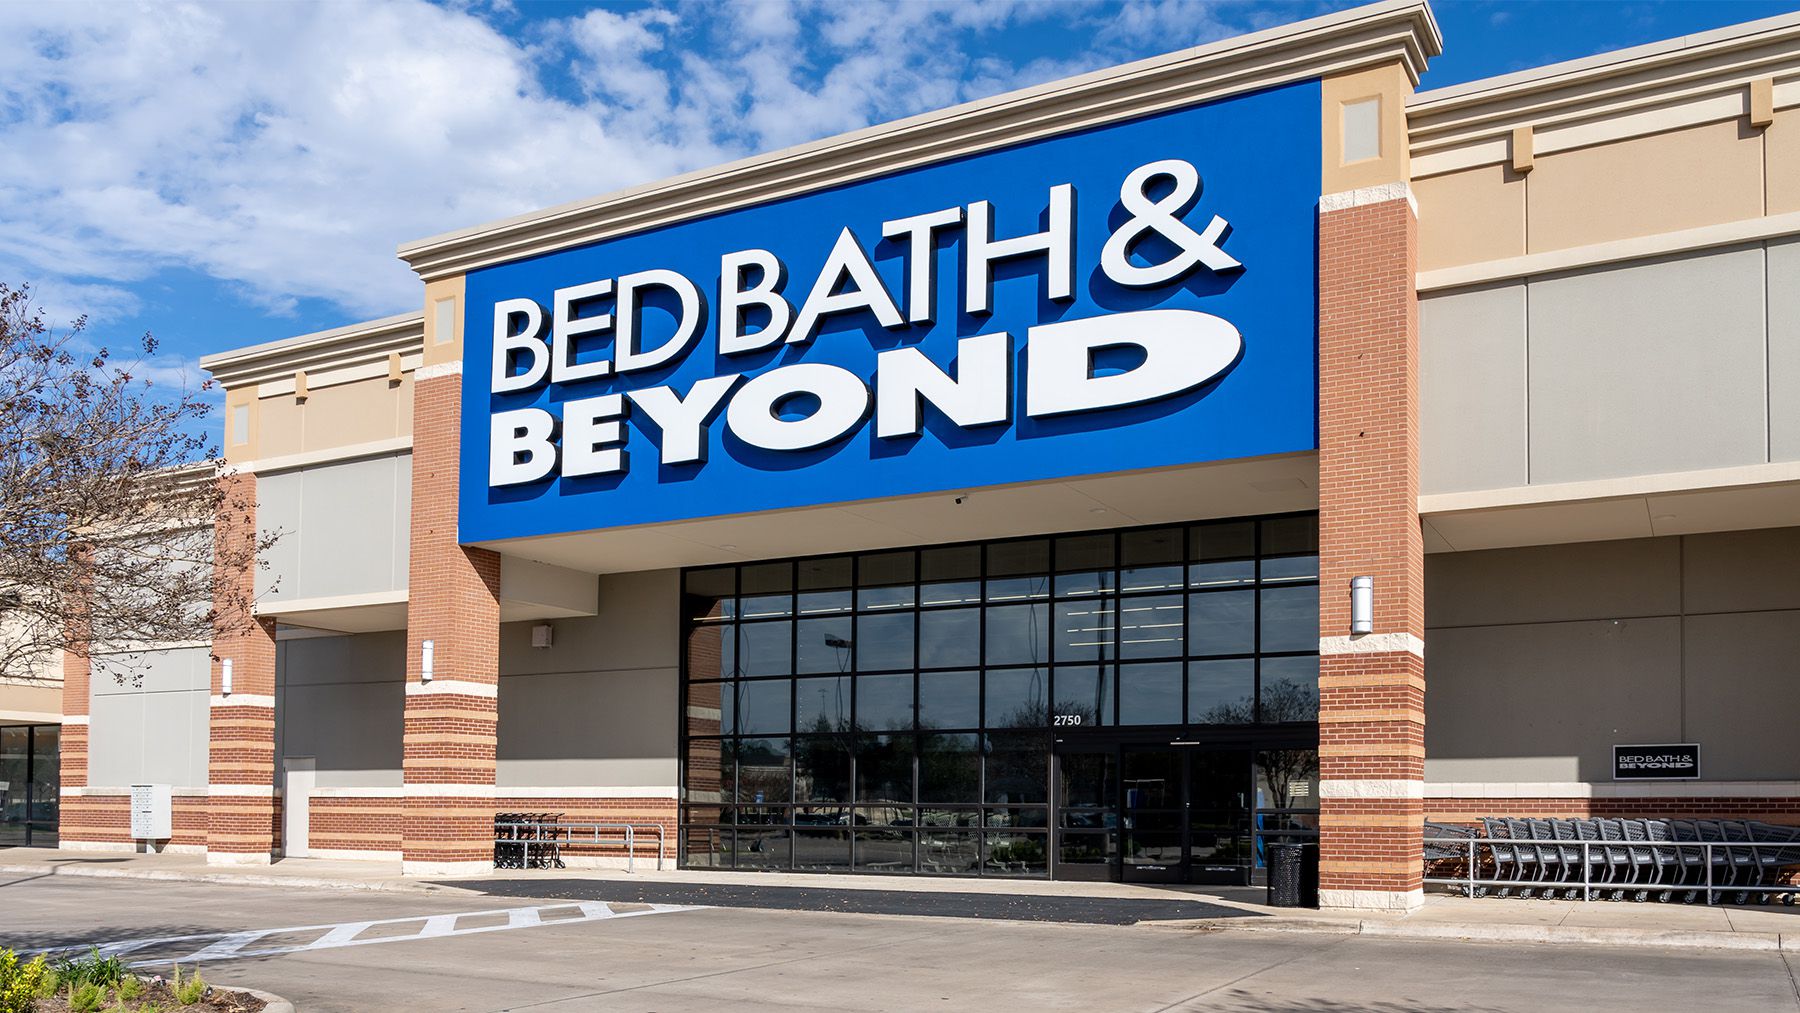 Bed, Bath & Beyond Plans to Swiftly Liquidate, Shutter Stores